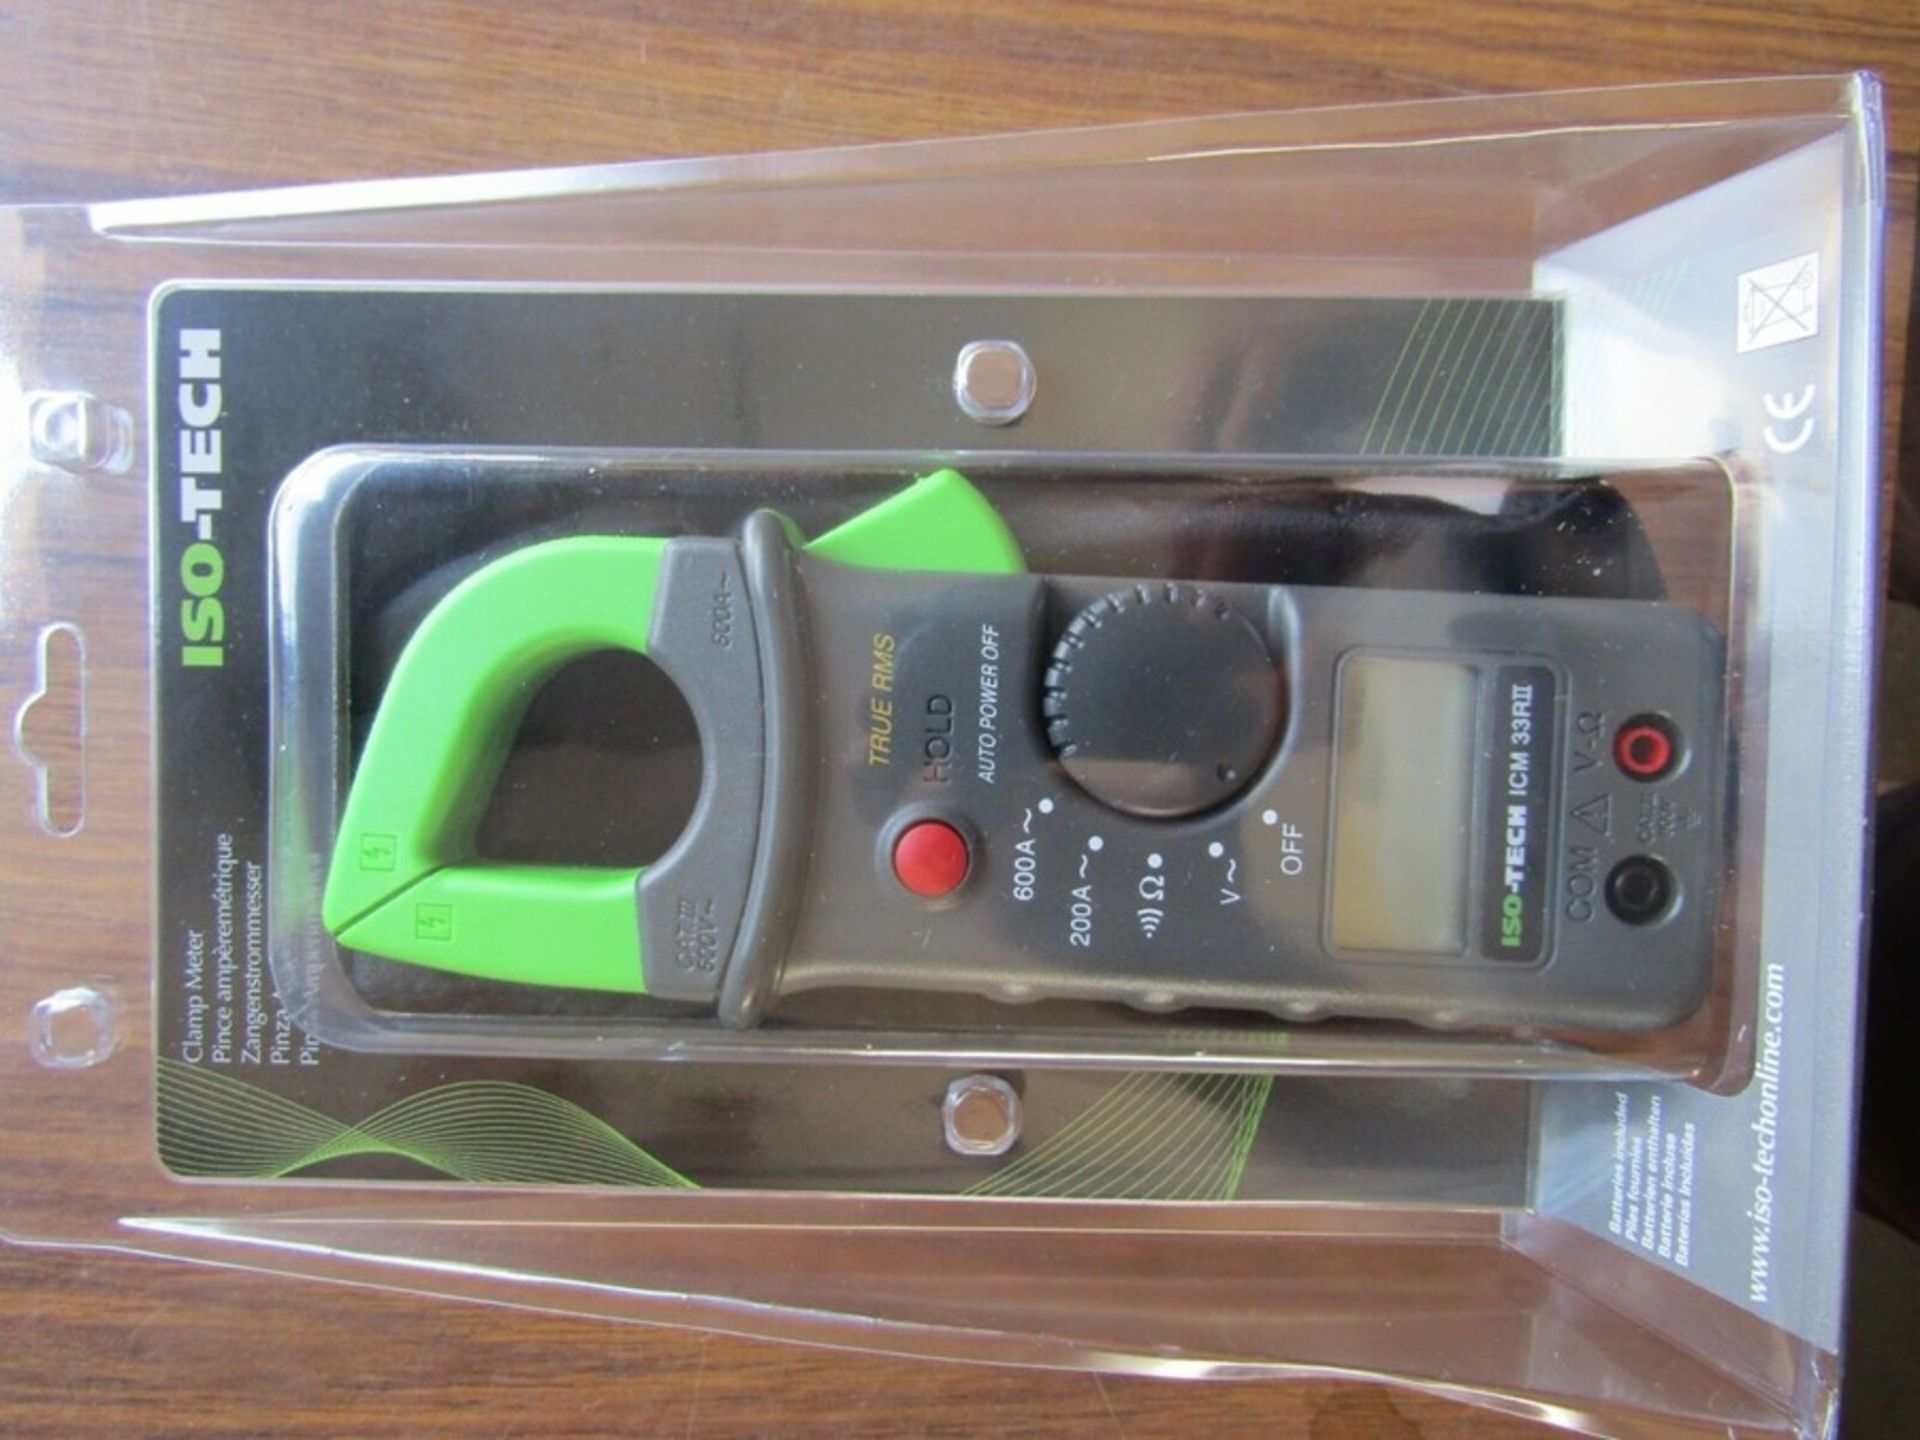 ISO-TECH ICM33RII Clamp Meter, Max Current 600A ac CAT III 300V J2 6973979